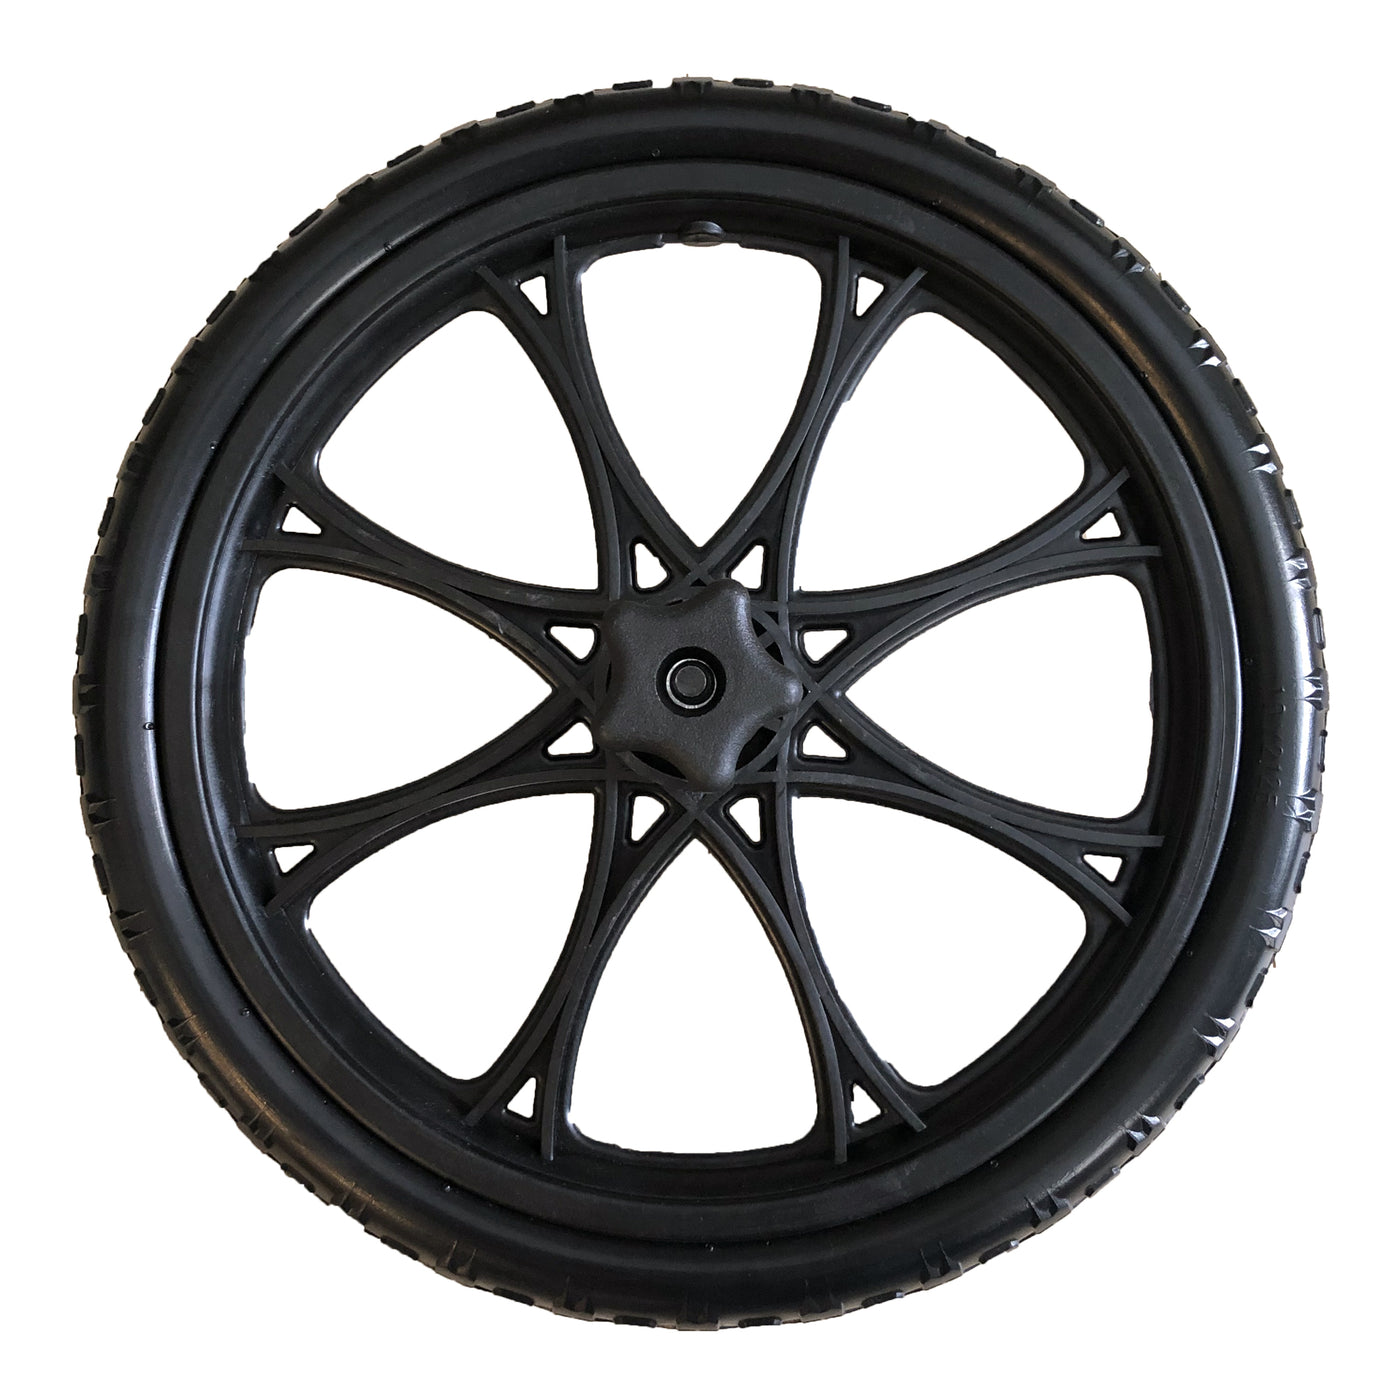 All-Terrain Airless Wheel (w/ Axle Hardware) - OUT OF STOCK